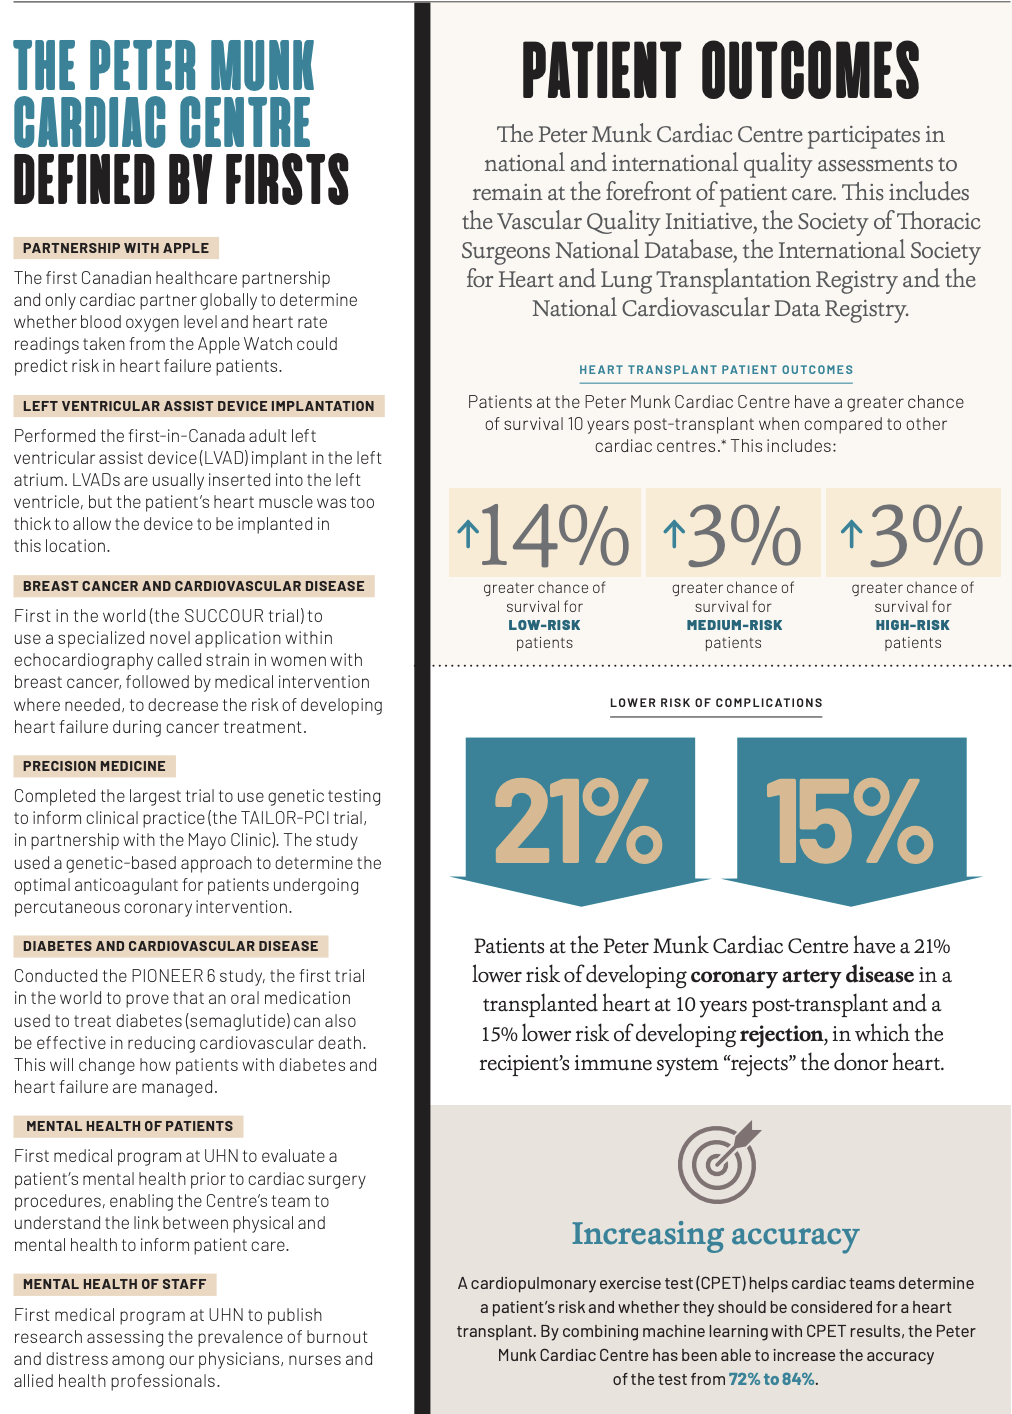 Infographic with information about PMCC's accomplishments, "defined by firsts" is one section, patient outcomes stats are on the right hand side along with stats on increasing accuracy and lower risks of complication.